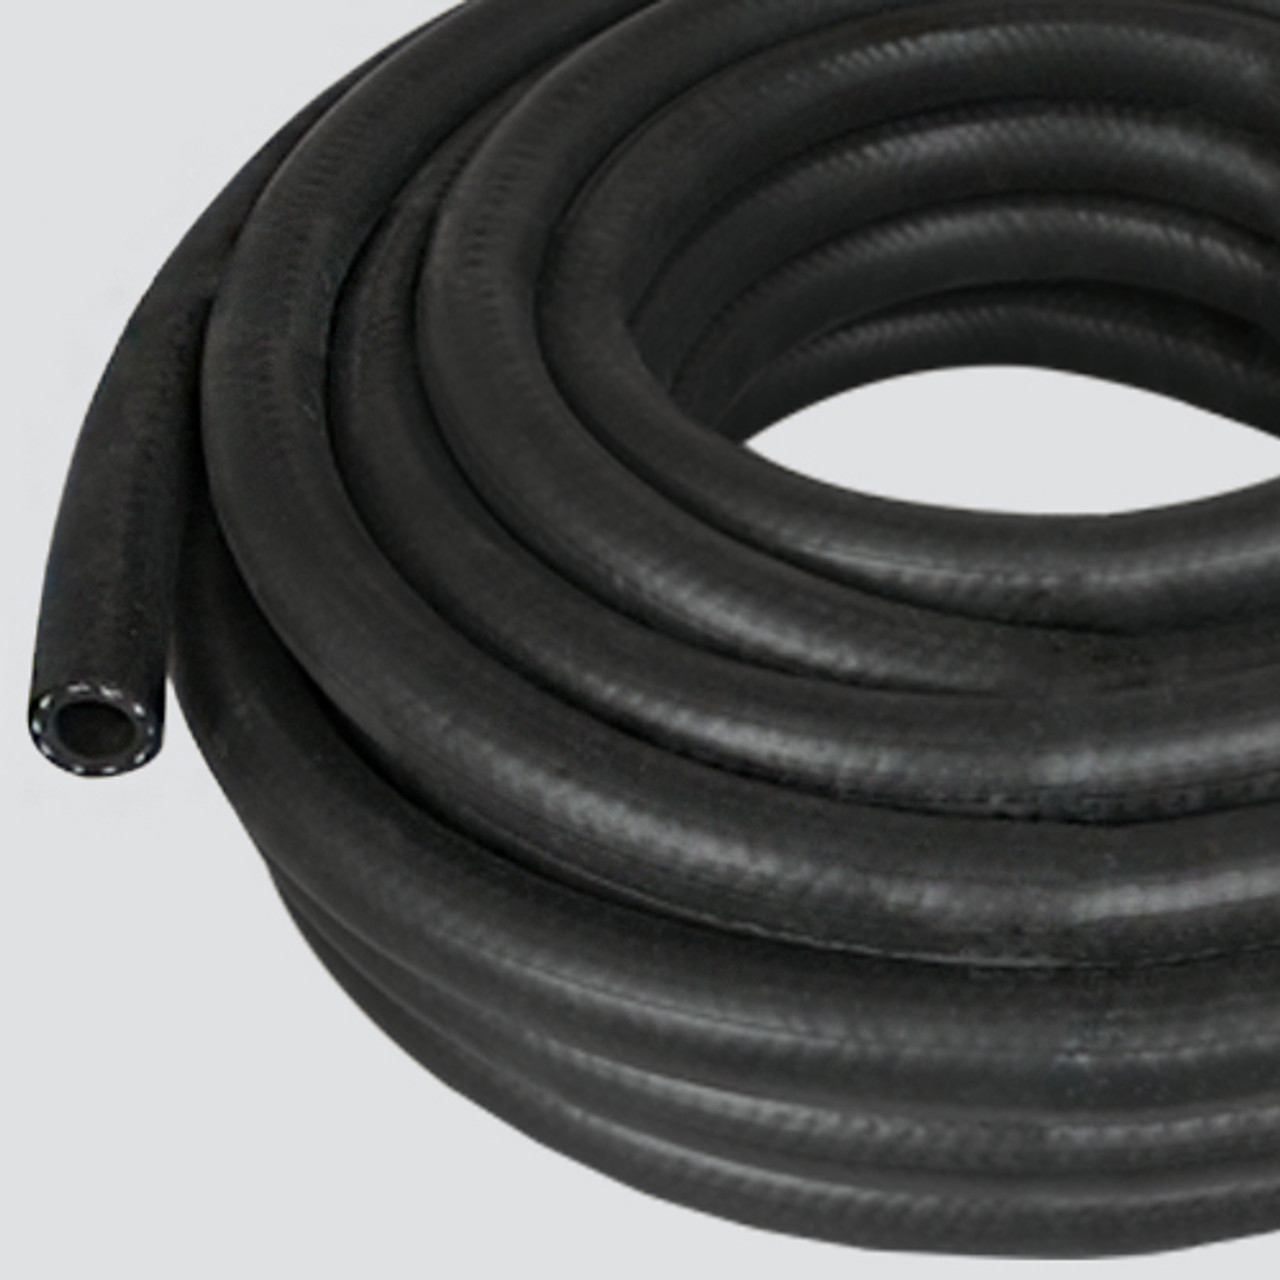 10 METER WATER PIPE - Gun Hose Pipe for Garden, Car, Bike, Air Consumption:  5 to 6 cfm, Nozzle Size: 1 mm at Rs 200 in Surat